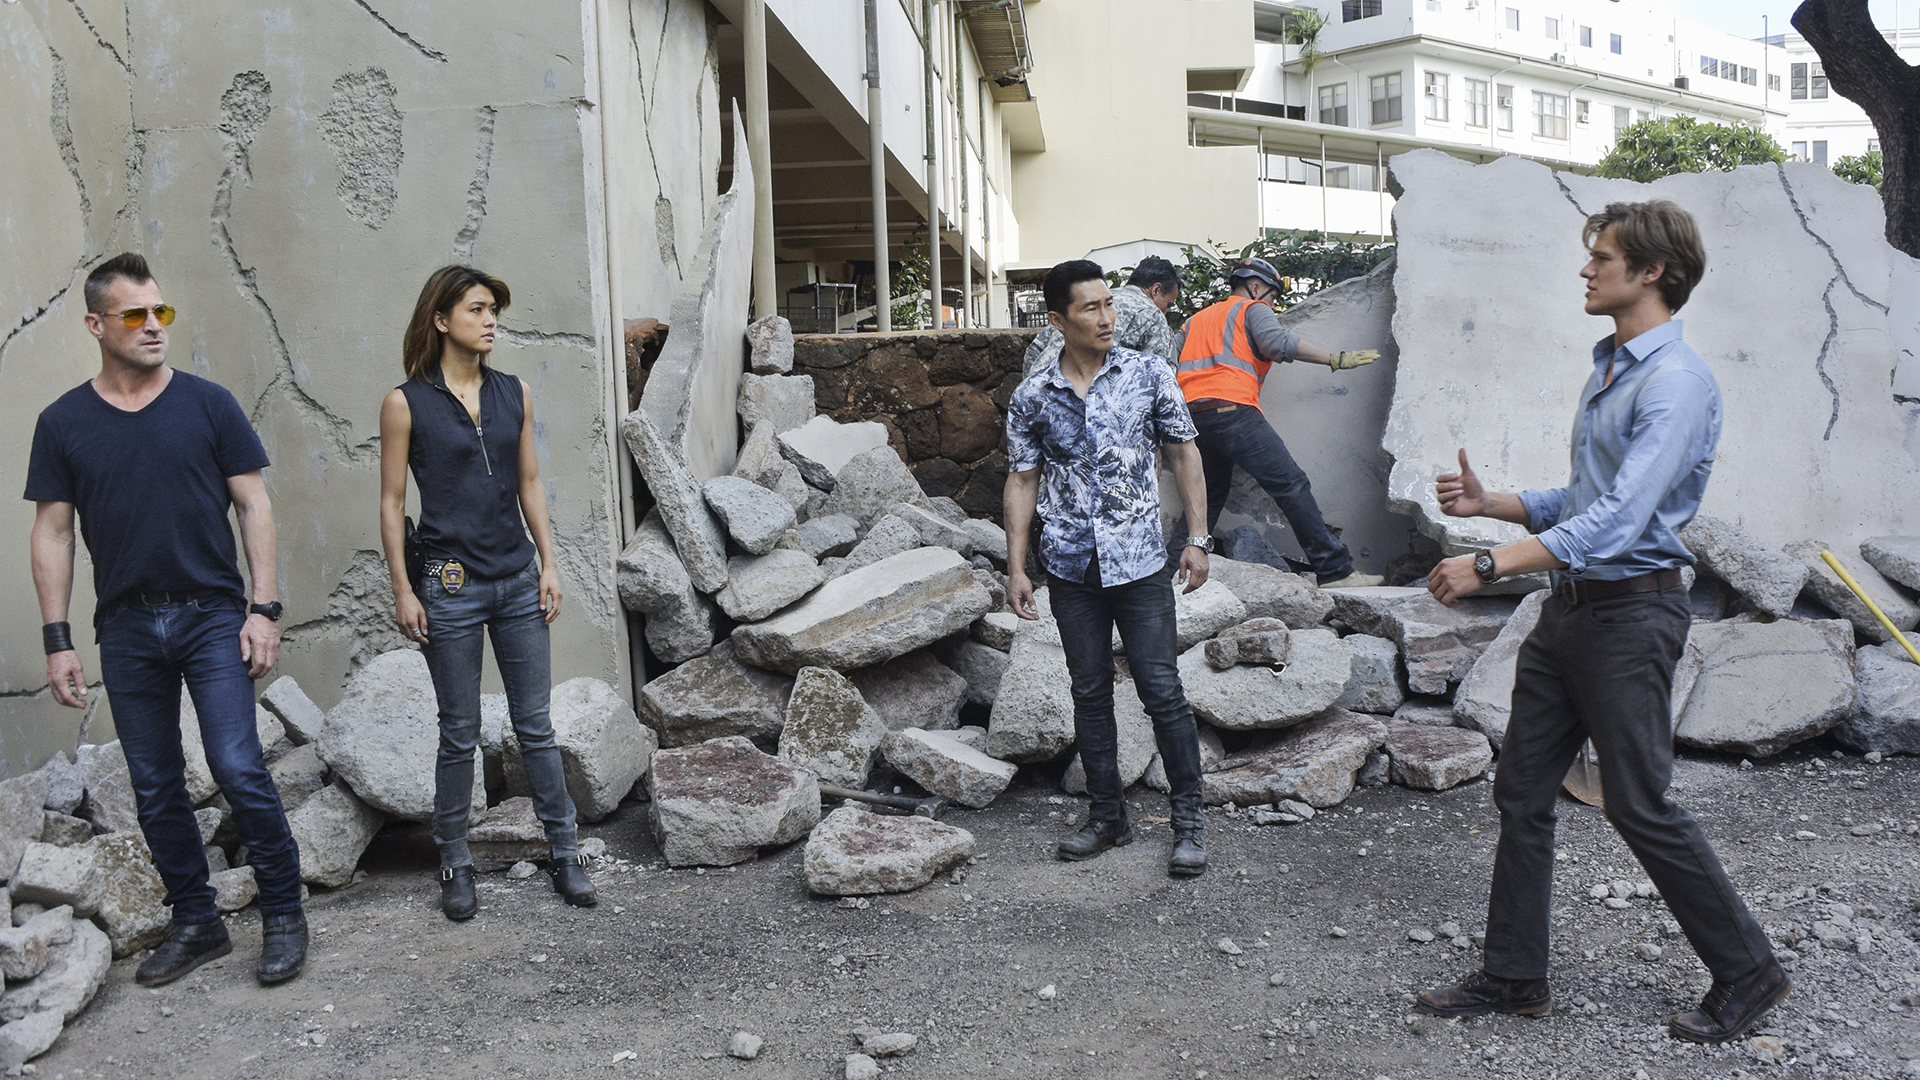 The team goes over the potential options amidst the earthquake wreckage.